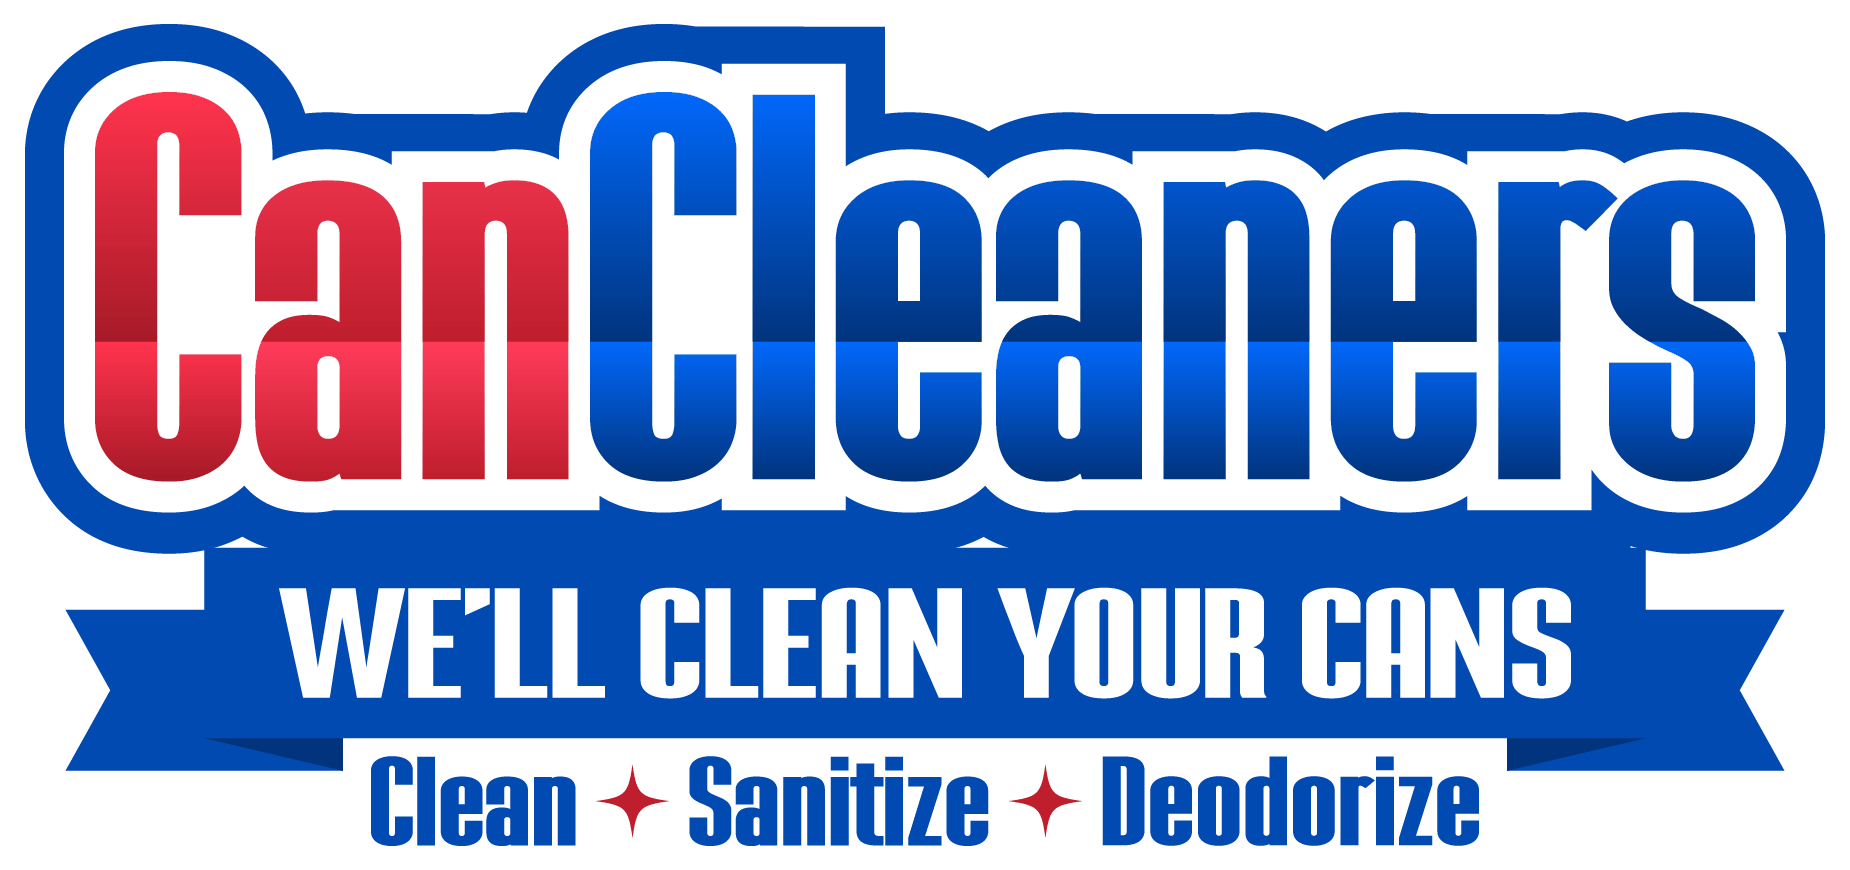 CanCleaners